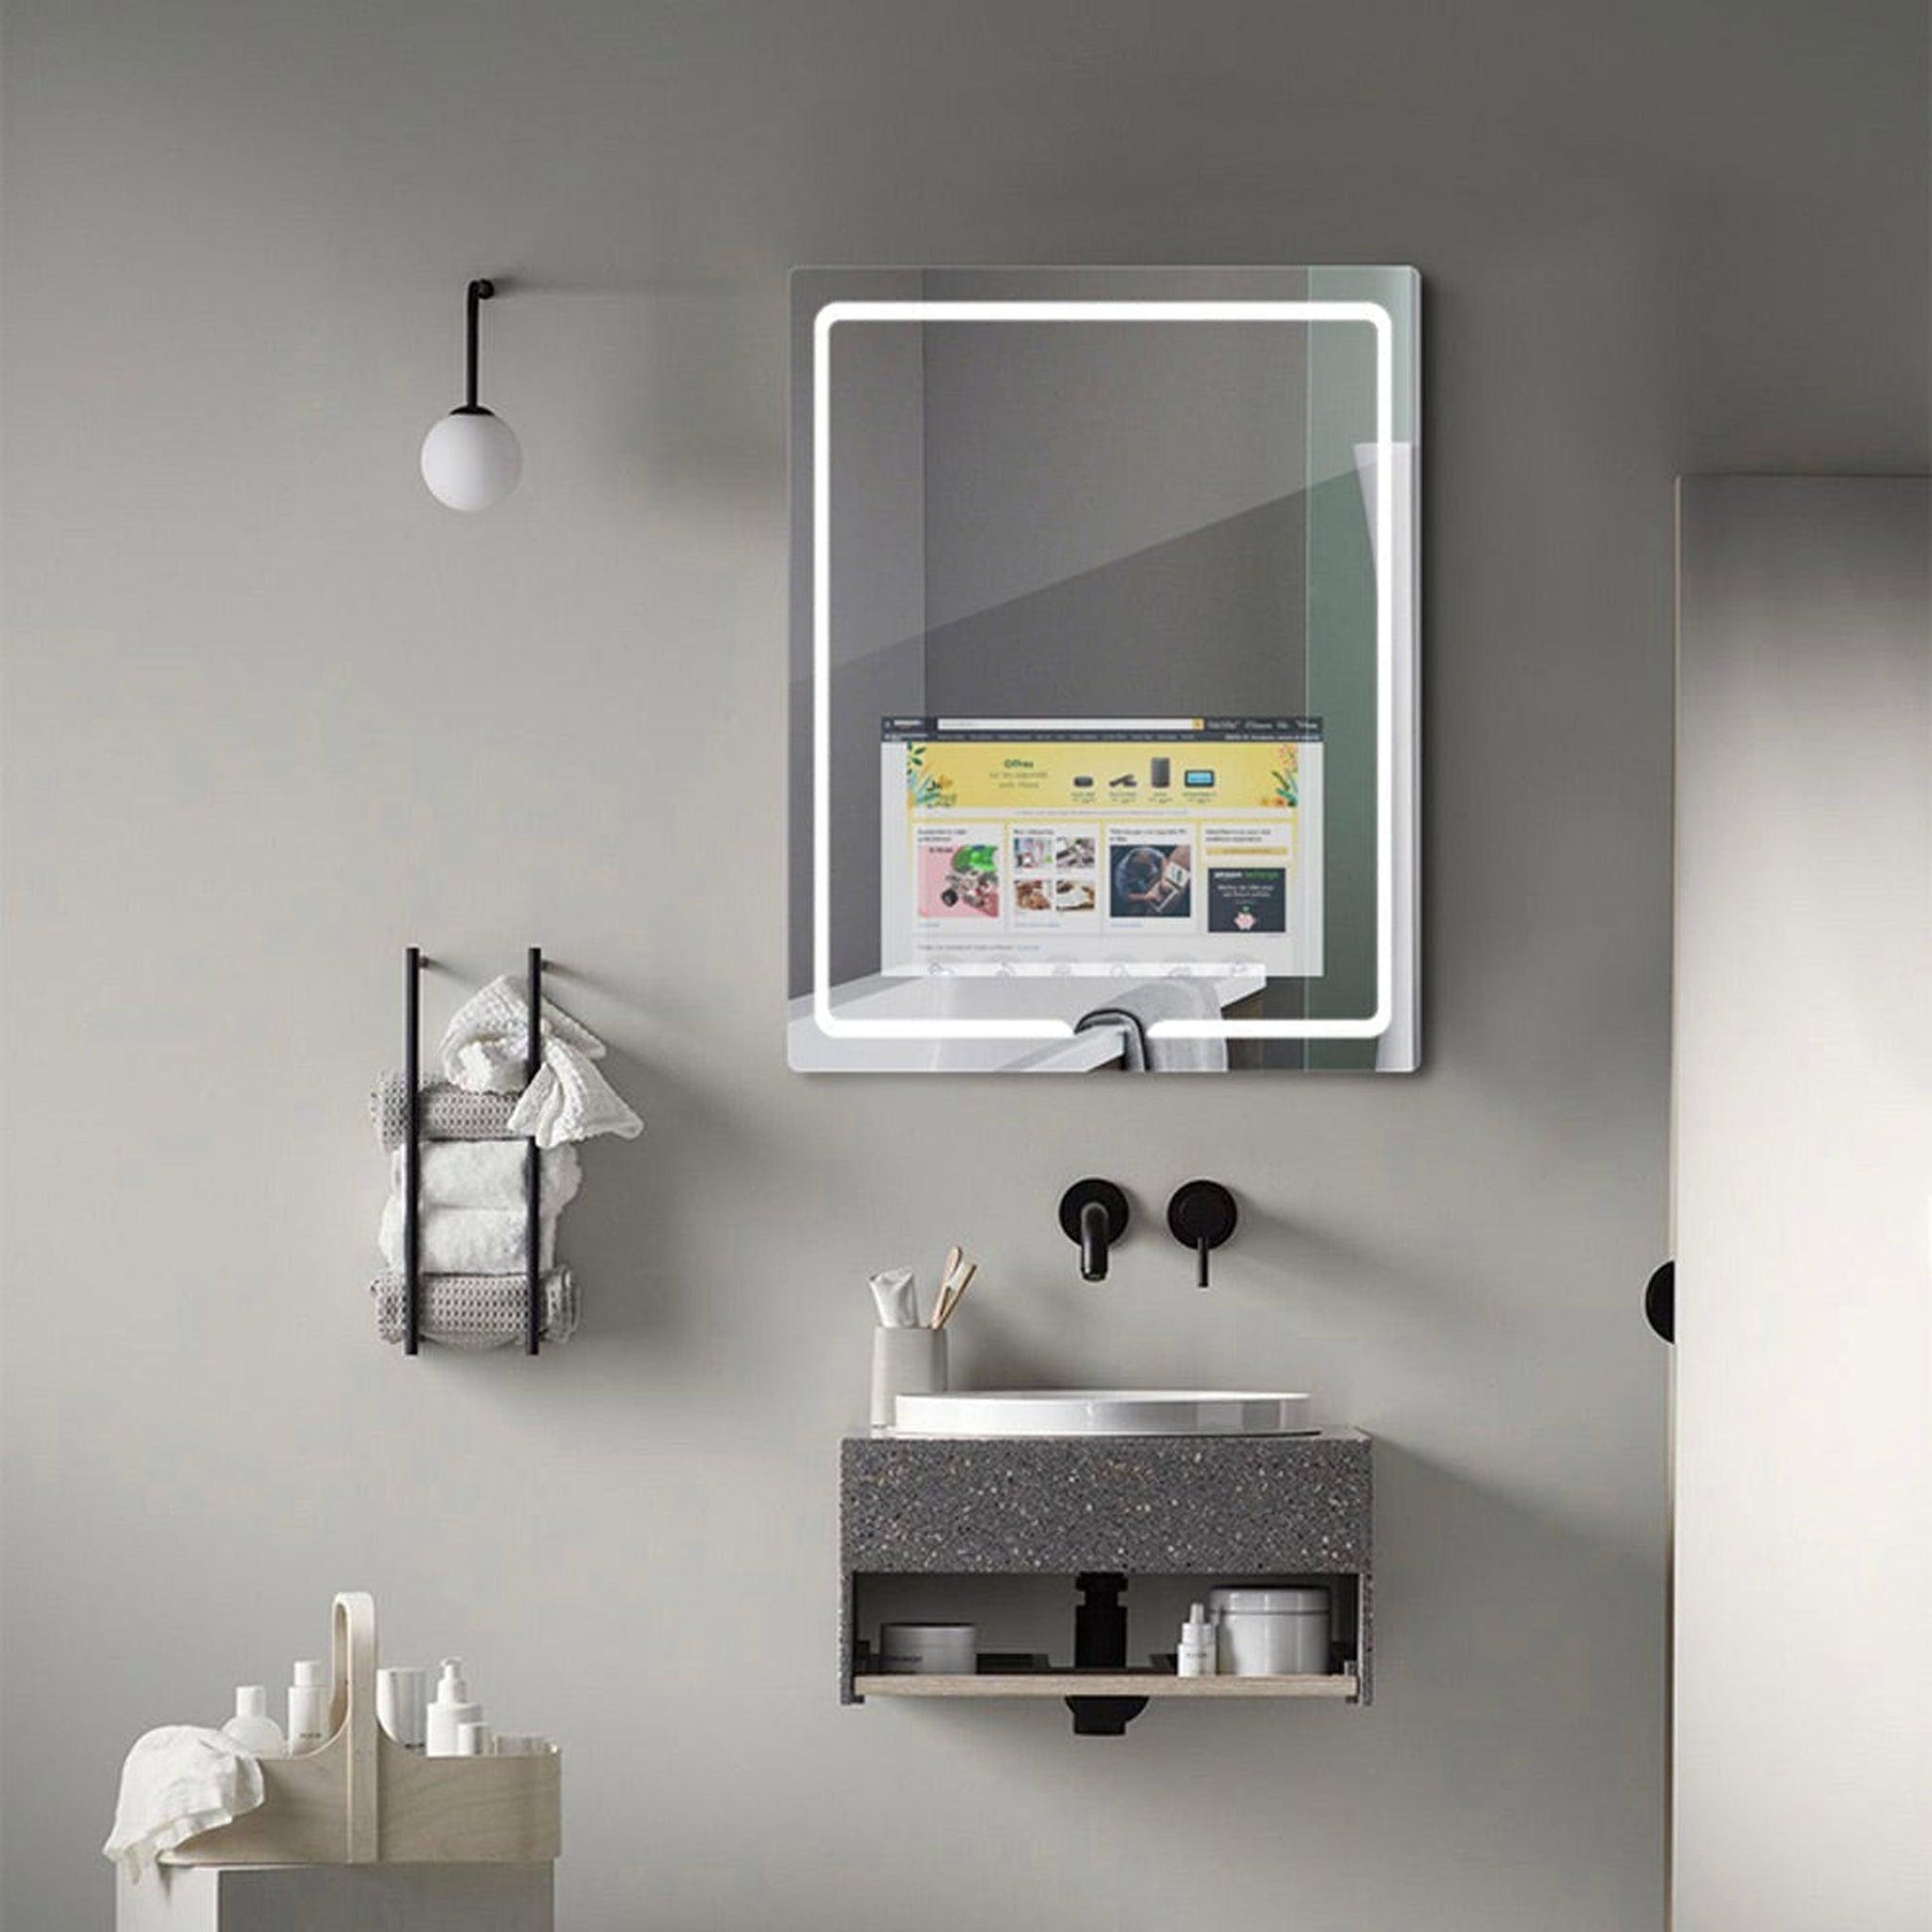 Aquadom Vision 24" x 32" Smart LED Lighted Bathroom Mirror With Built-in TV and Defogger